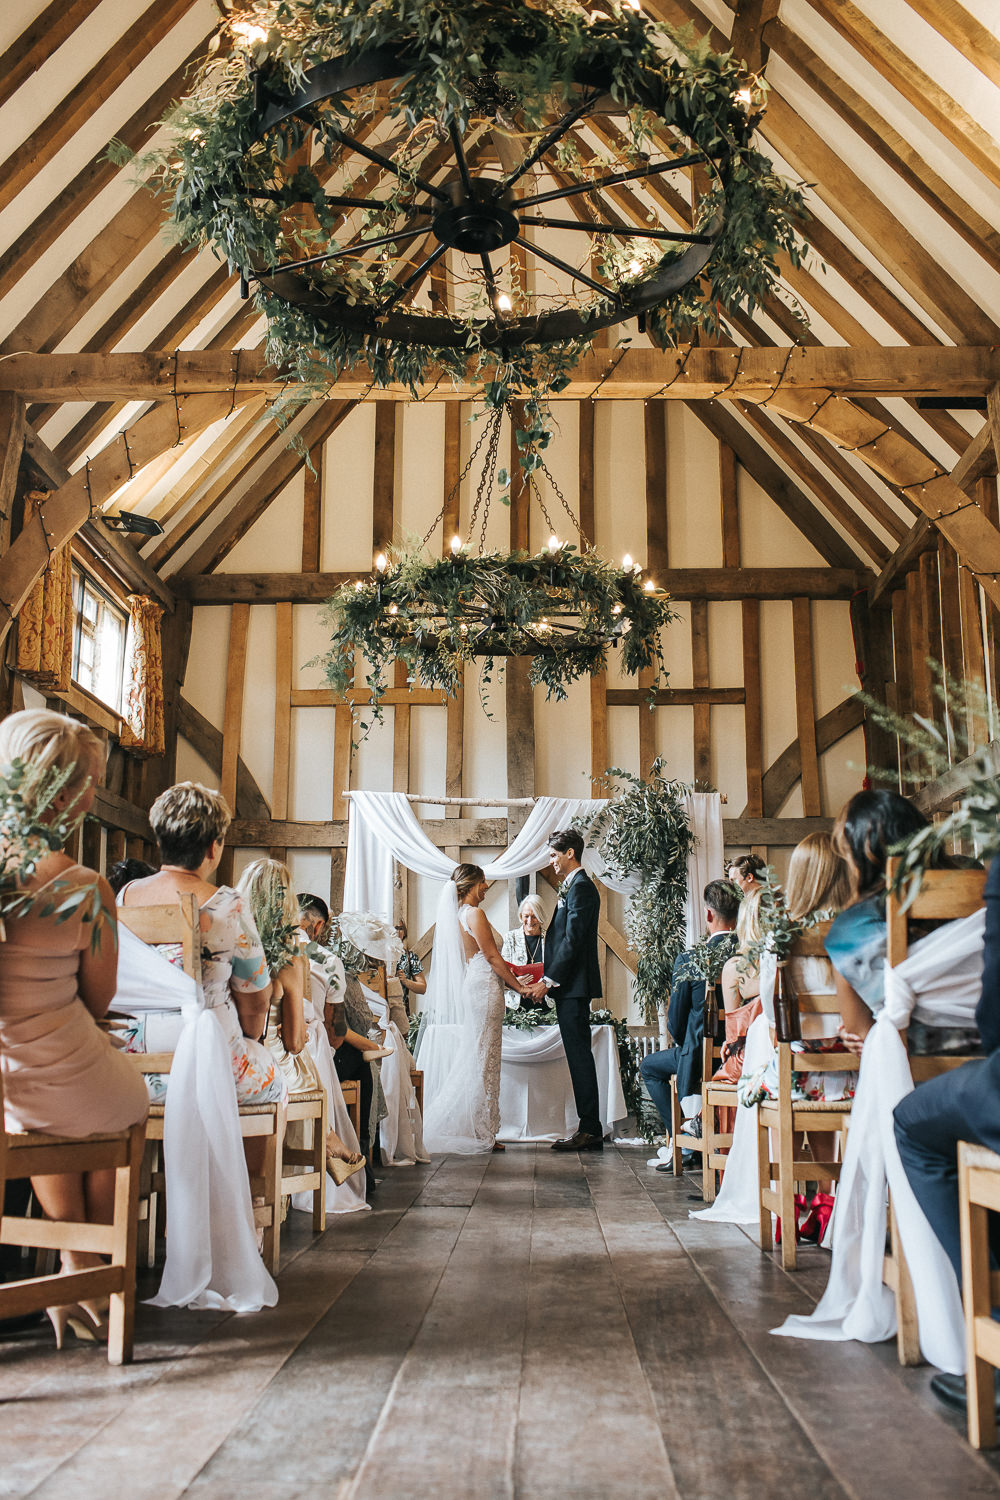 Grace Loves Lace Gown For A Rustic Wedding At Gate Street Barn Surrey